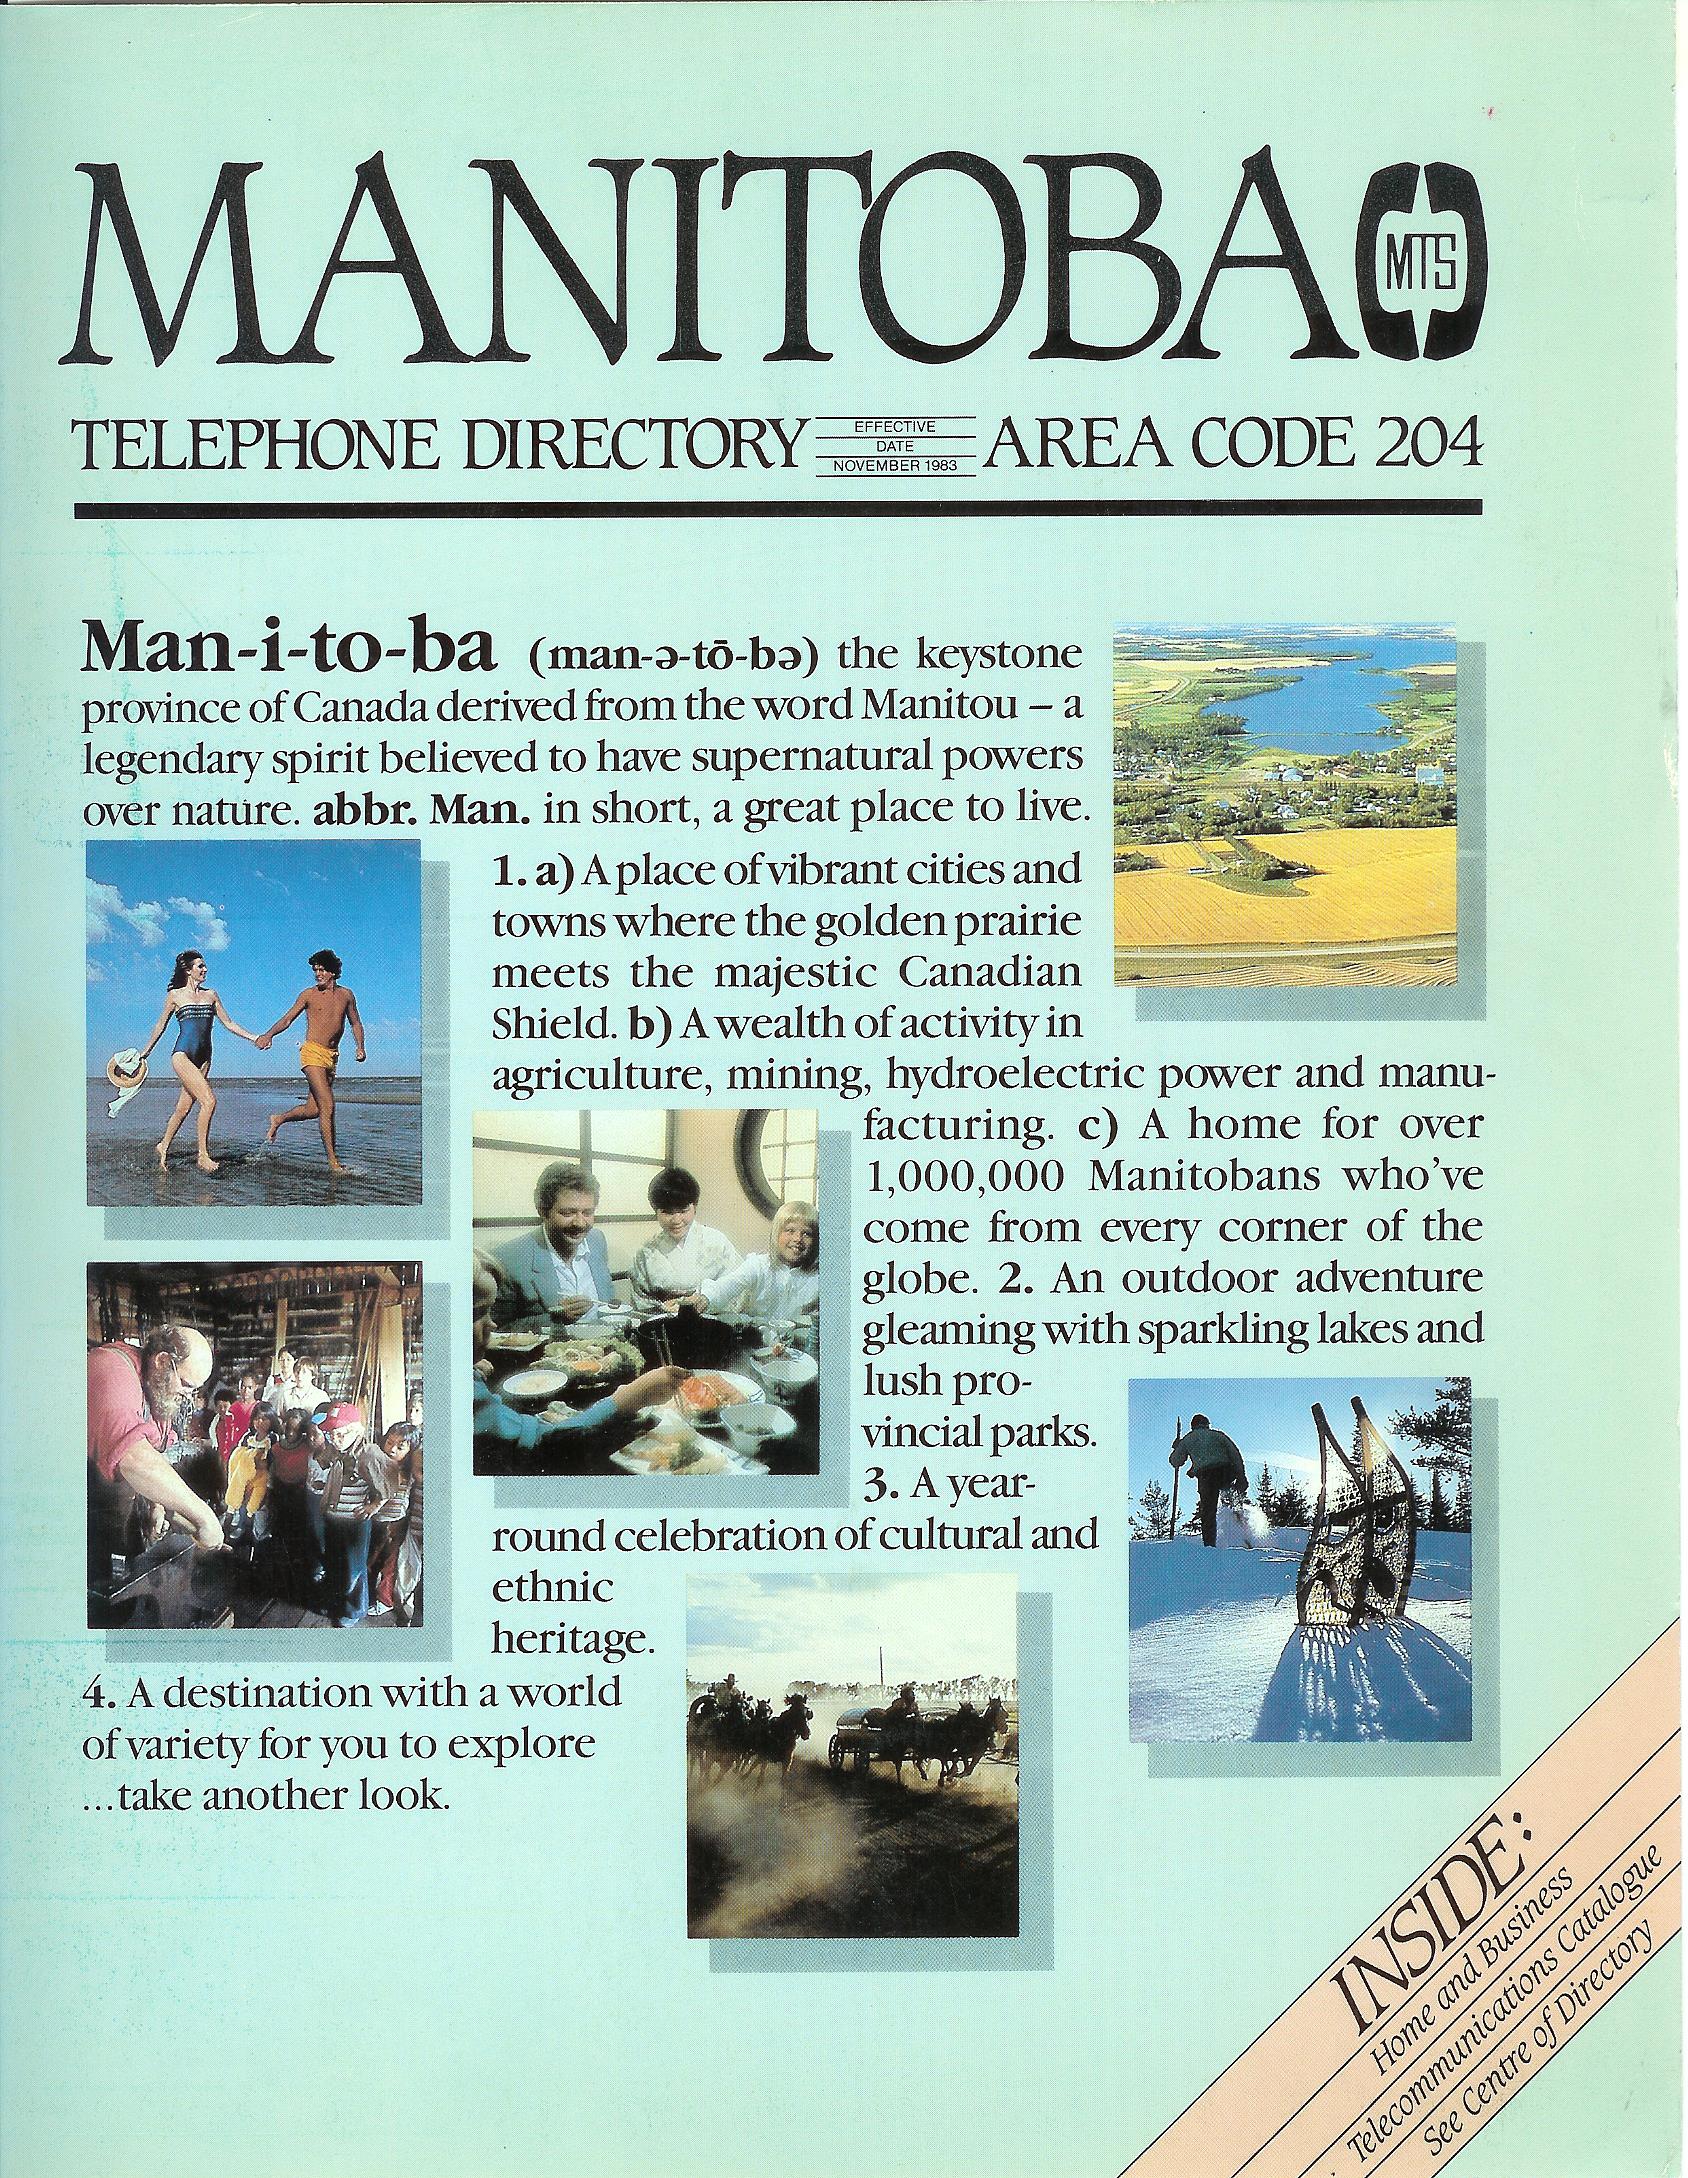 How can you get an MTS directory for Manitoba?